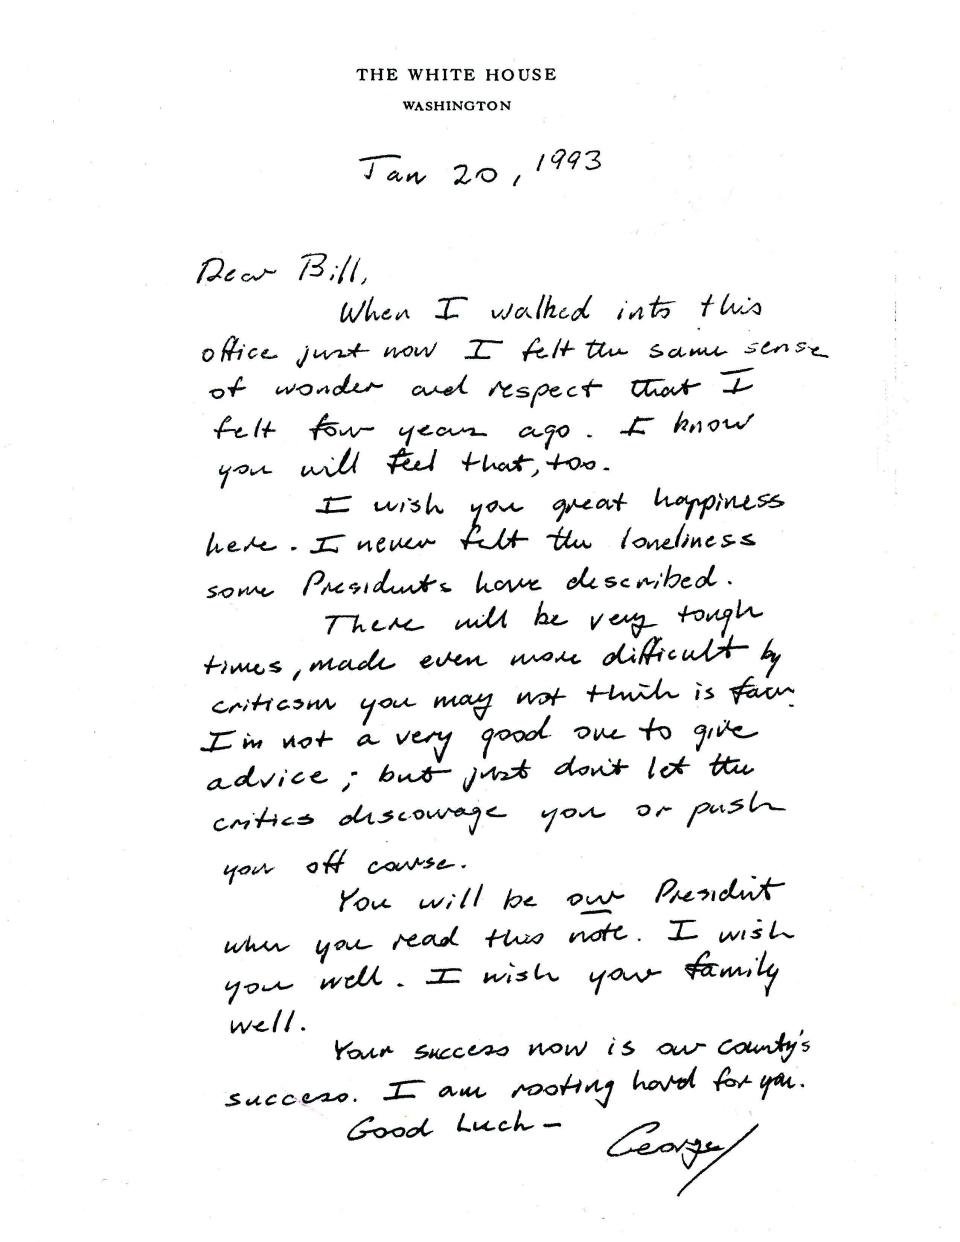 This image provided by the George H.W. Bush Presidential Library and Museum shows a note written by George H.W. Bush to Bill Clinton. (George H.W. Bush Presidential Library and Museum via AP)